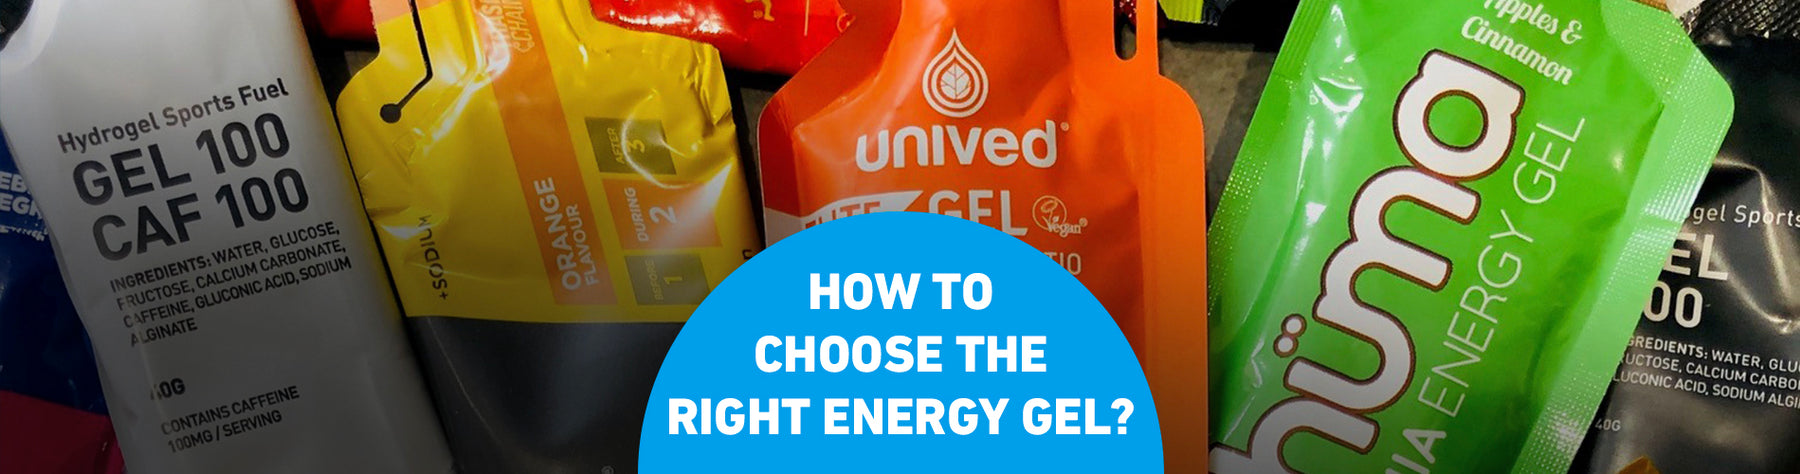 5 Ways to Choose the Right Energy Gel